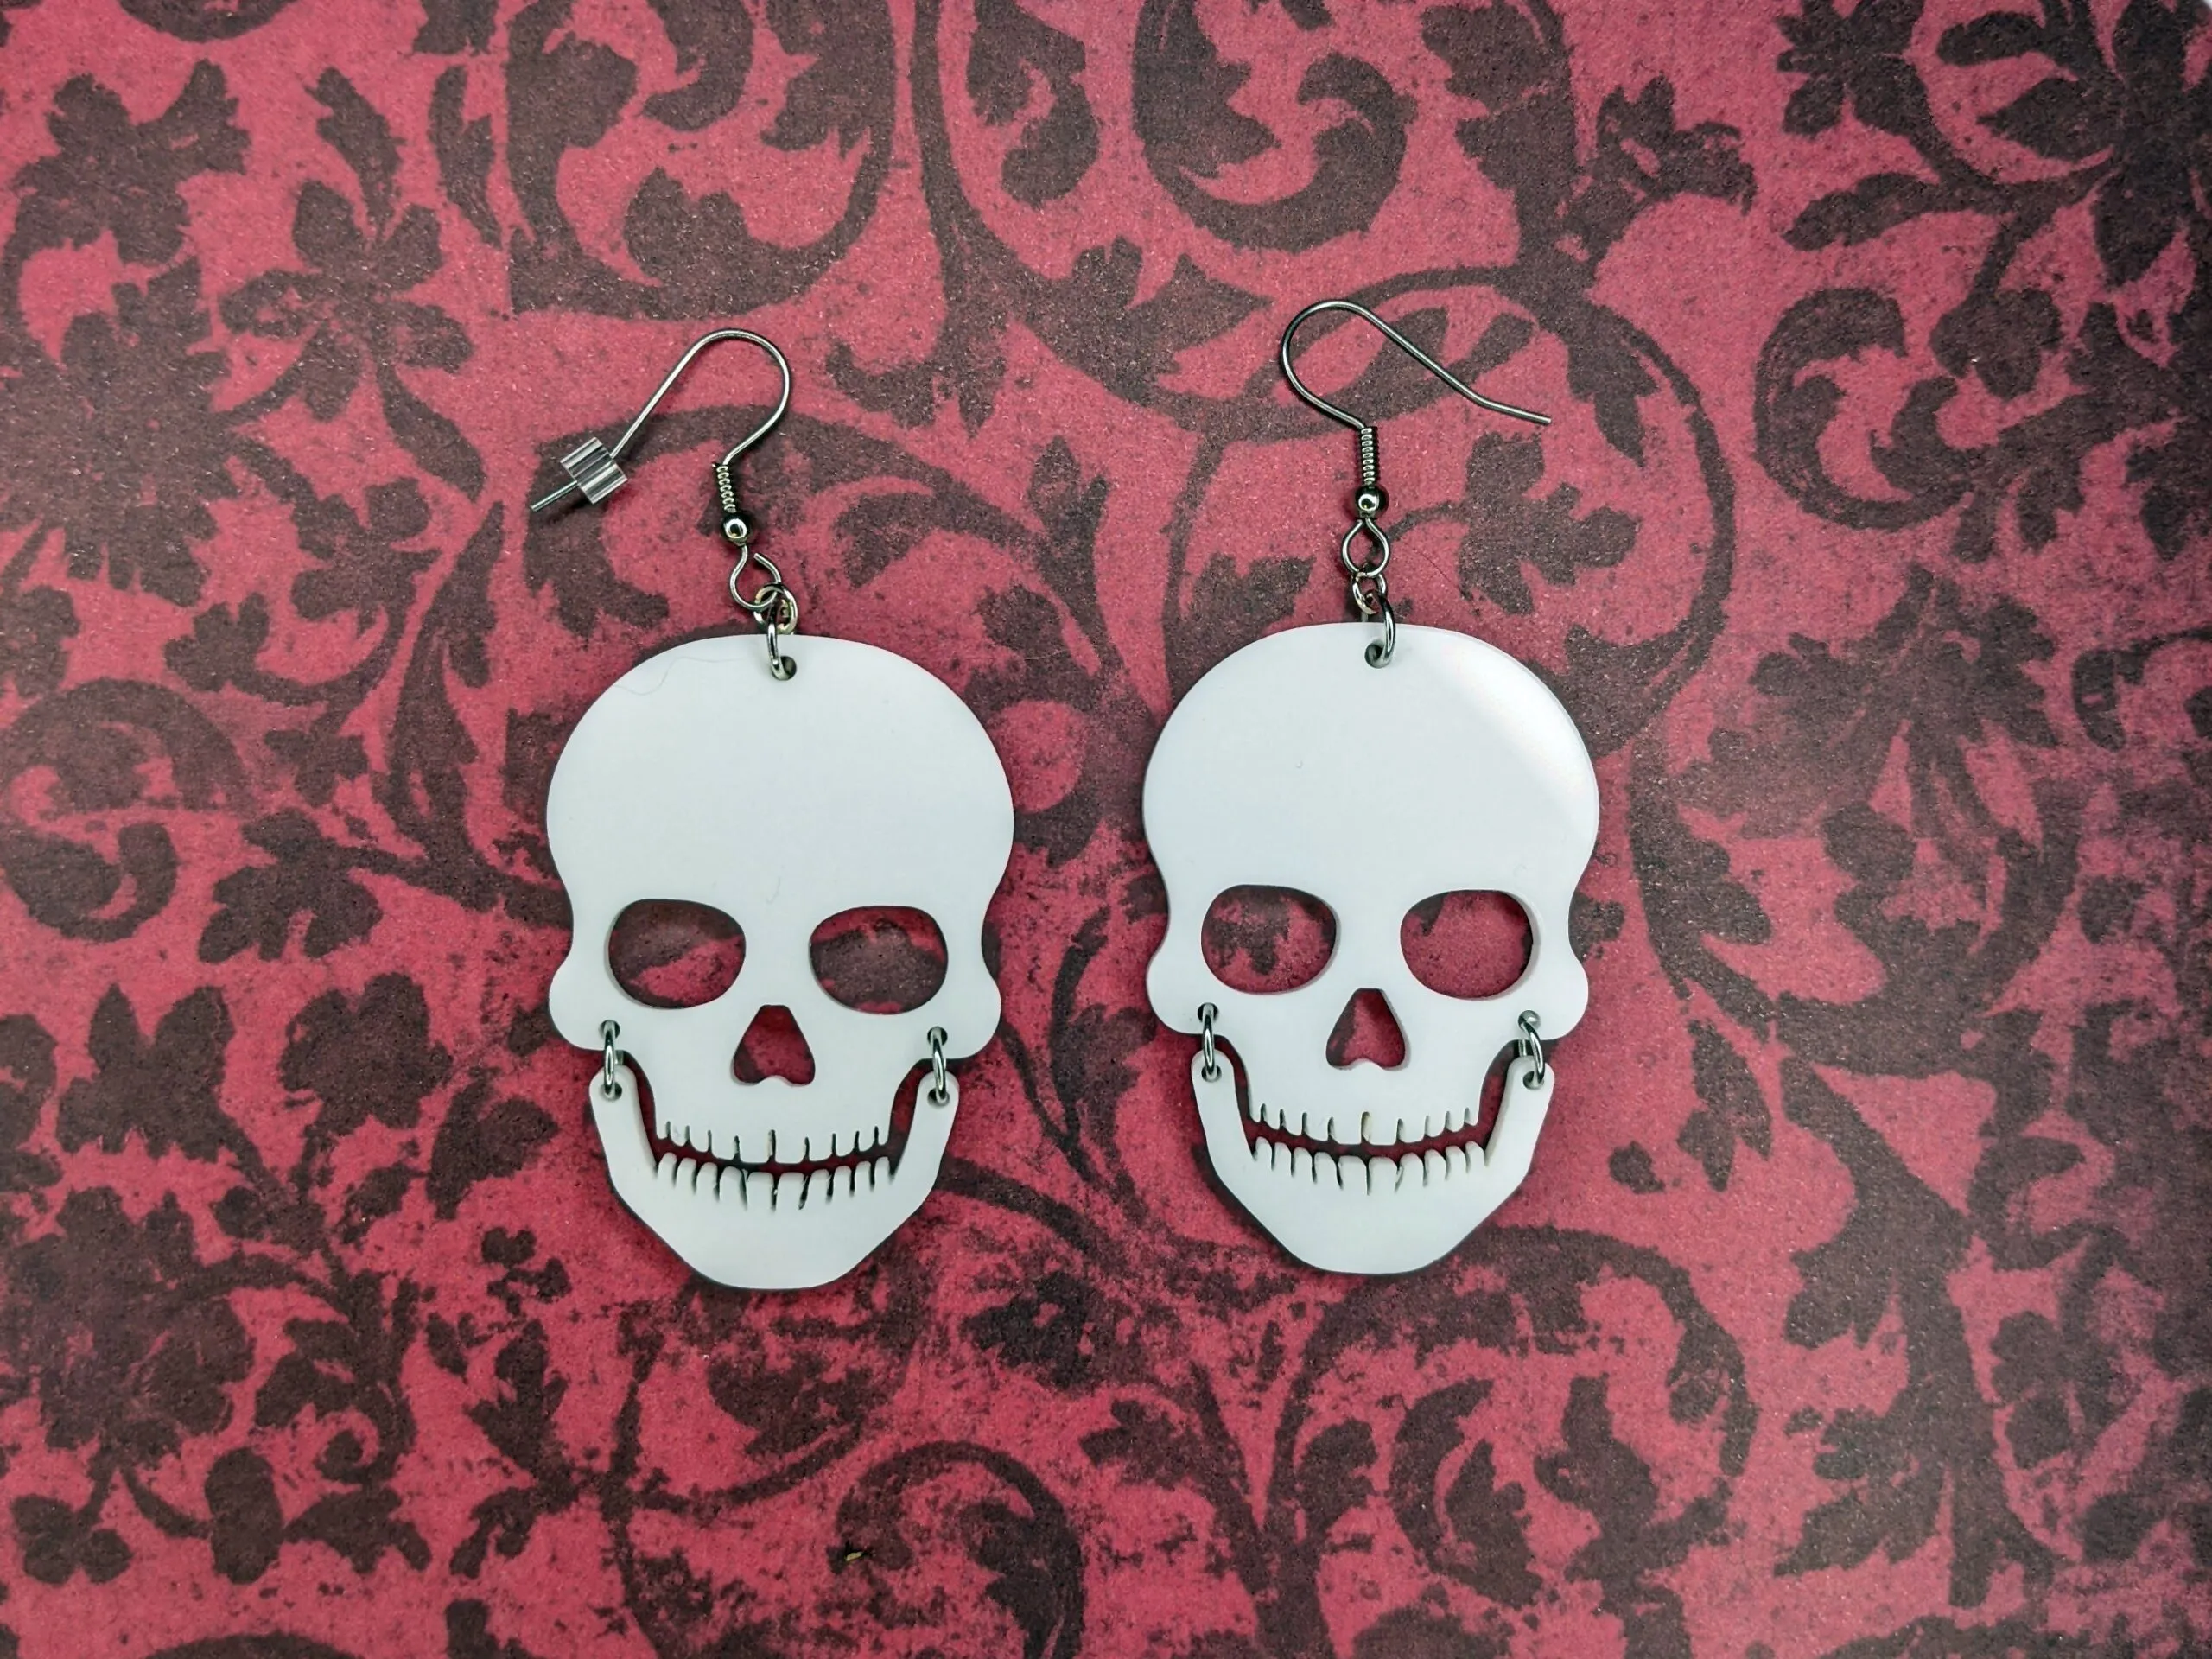 10 Style Tips For Wearing Skull Earrings - Turkish Weekly